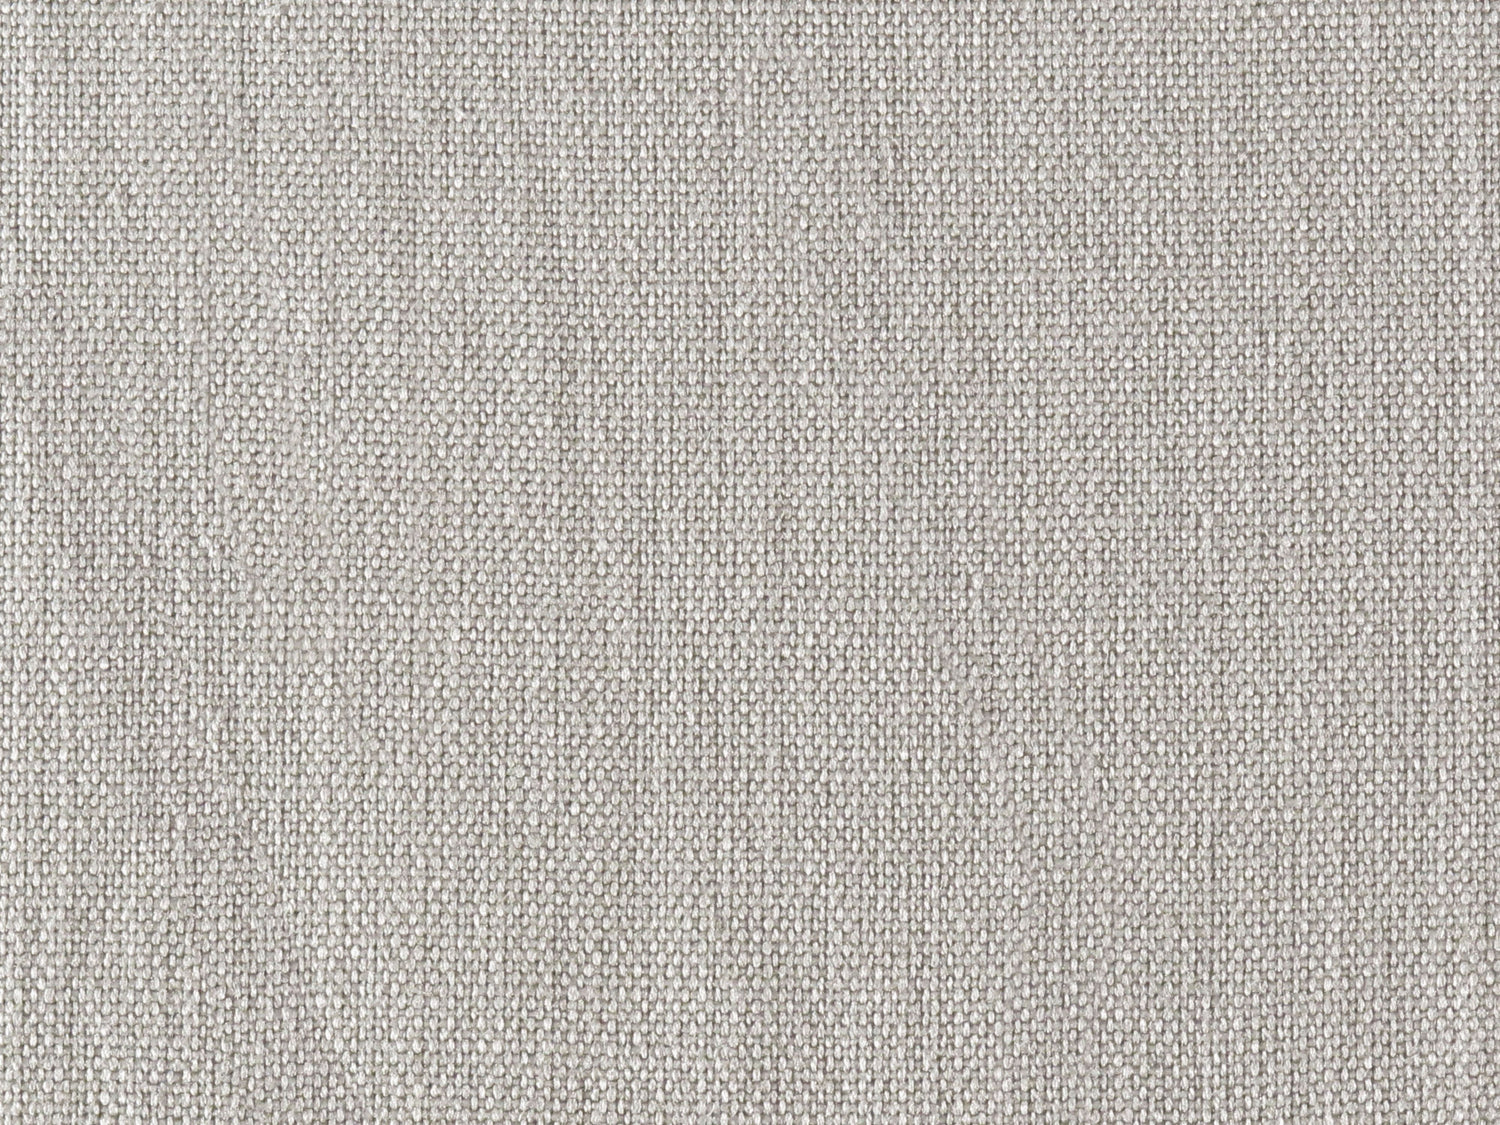 Lakeside Linen fabric in ocean color - pattern number PK 0003LAKE - by Scalamandre in the Old World Weavers collection